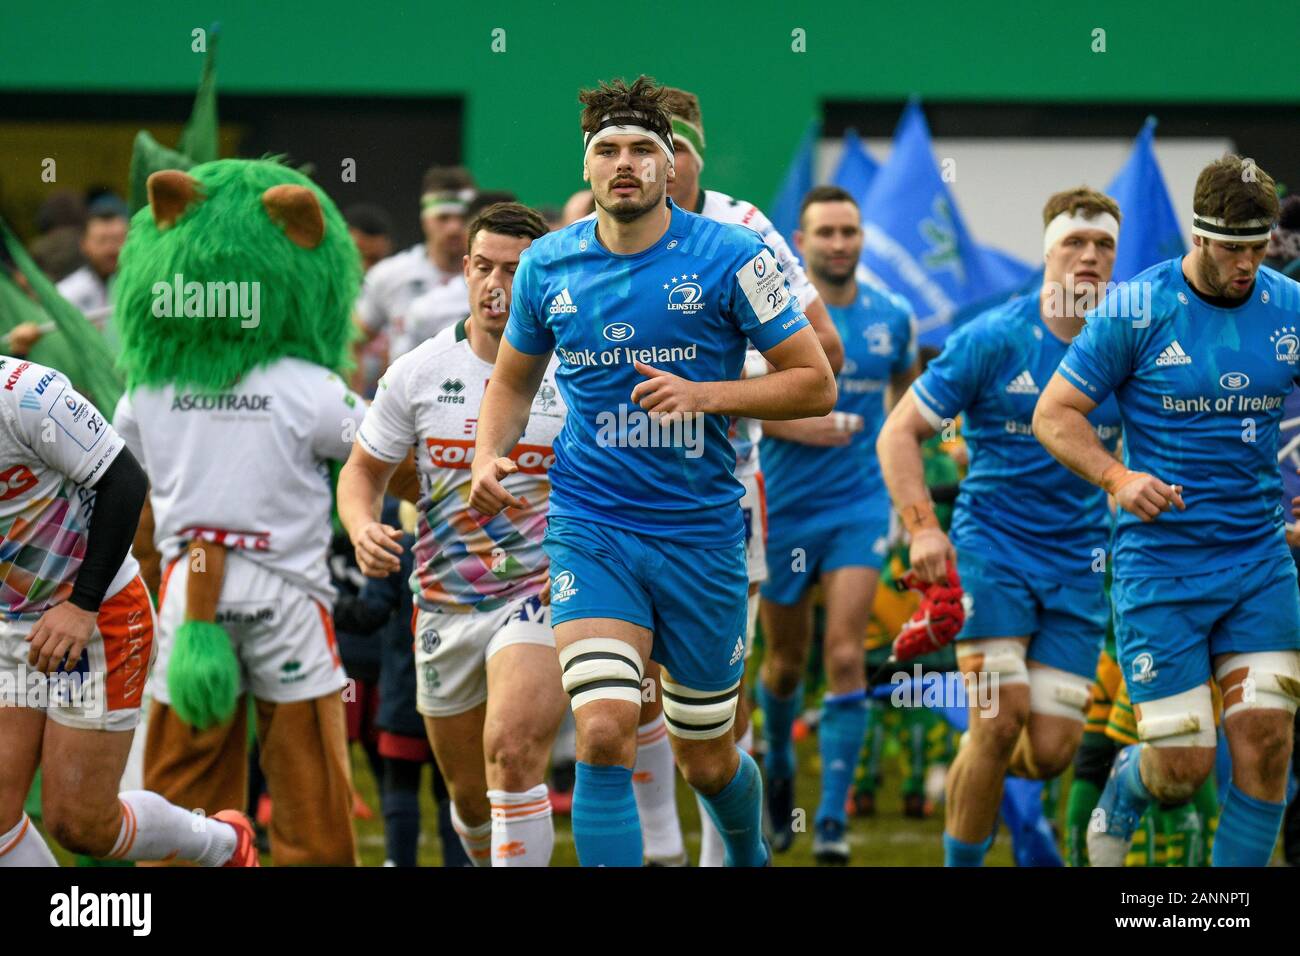 Treviso, Italy, 18 Jan 2020, max deegan (leinster) during Benetton Treviso  vs Leinster Rugby - Rugby Heineken Champions Cup - Credit: LPS/Ettore  Griffoni/Alamy Live News Stock Photo - Alamy